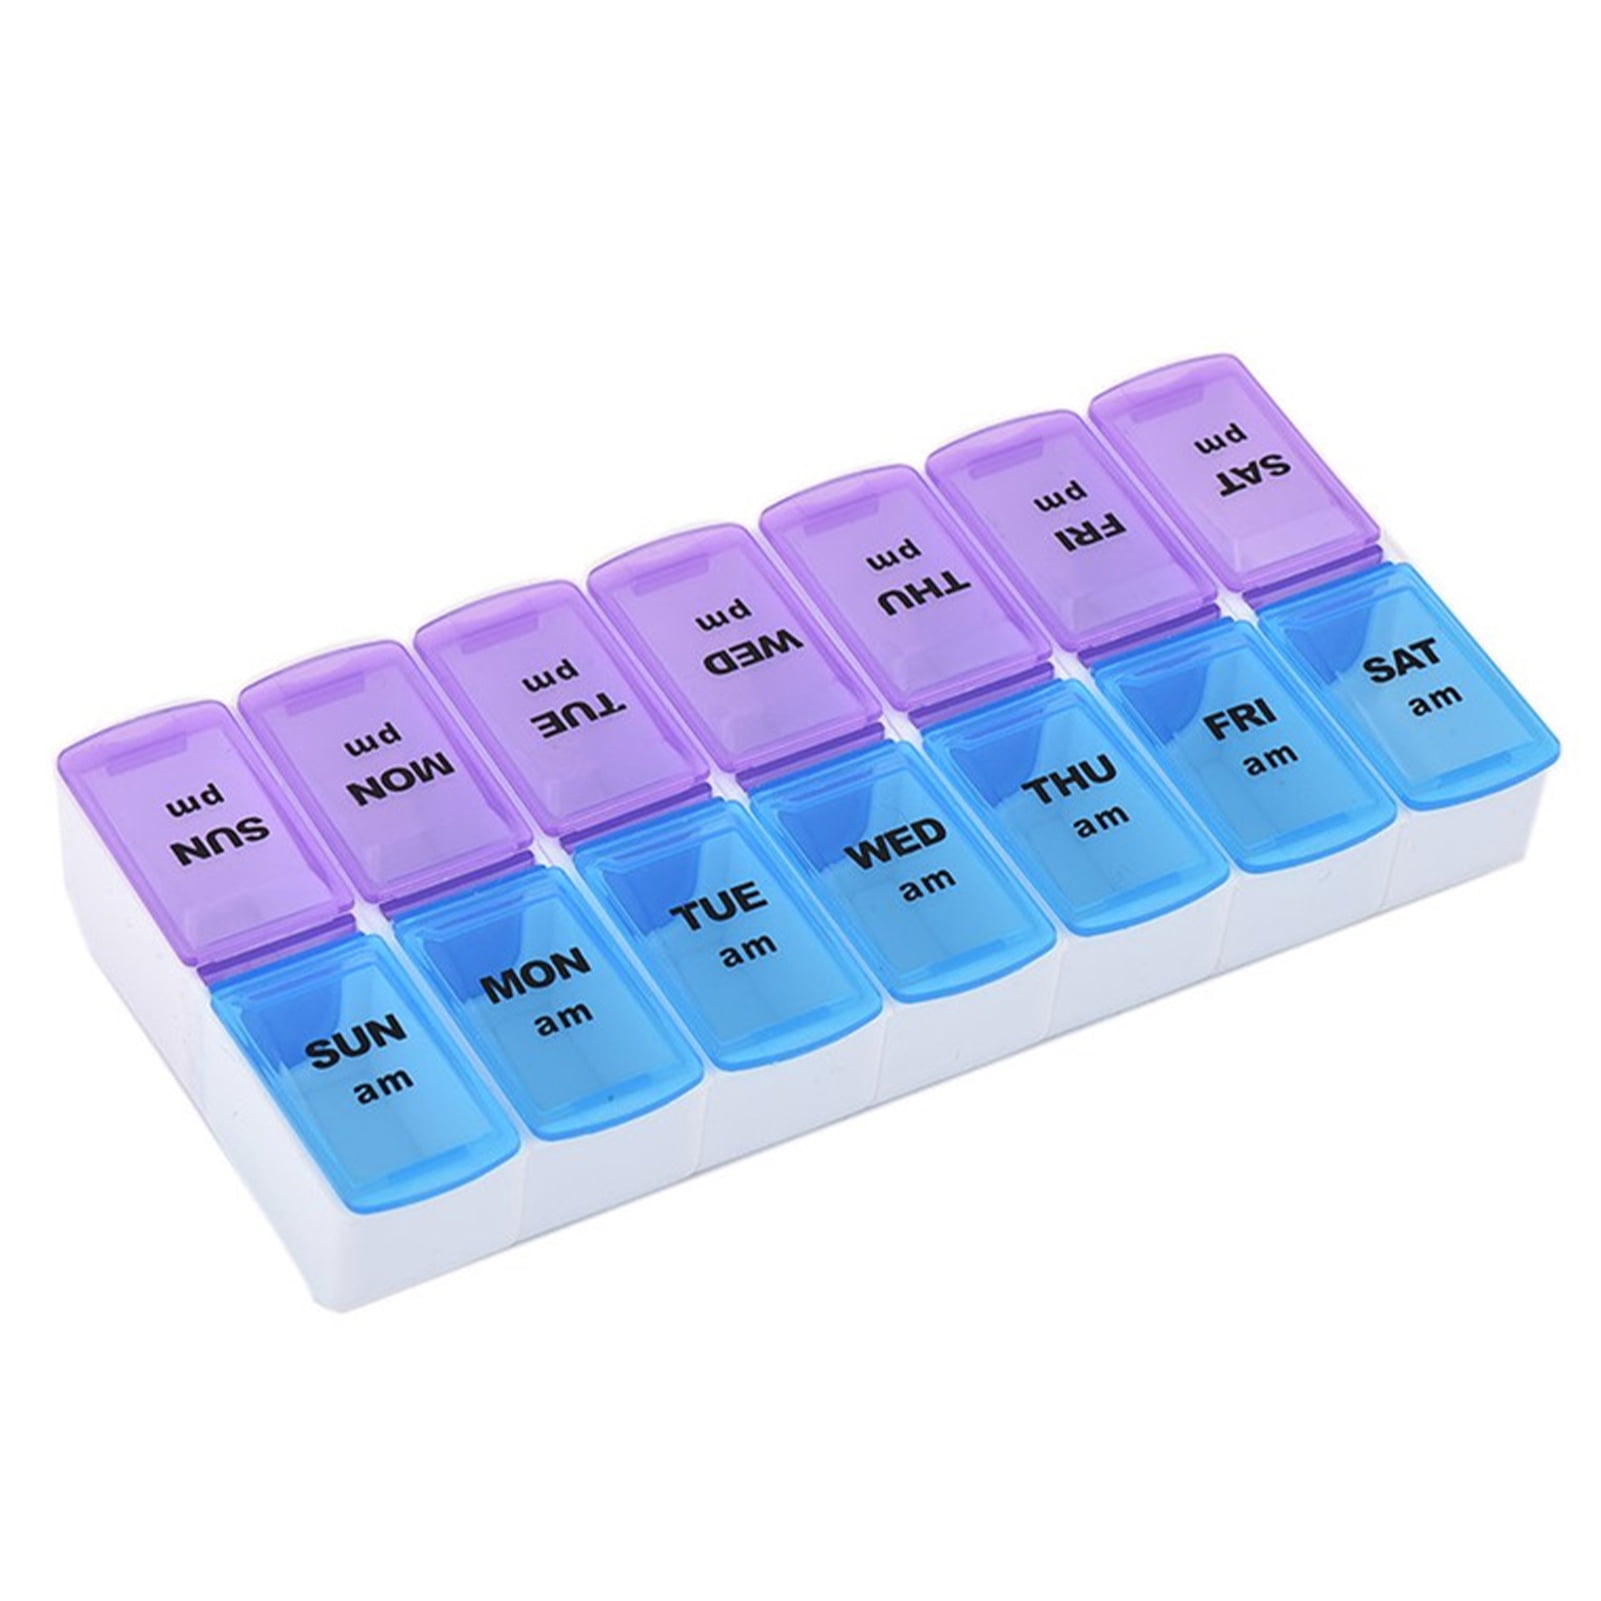 Mini Pill Box Organizer Tablet Holder 21 days Slot Weekly Medicine  Container Organizer Case For diet pills box - Price history & Review, AliExpress Seller - Top-Healthy Life Store